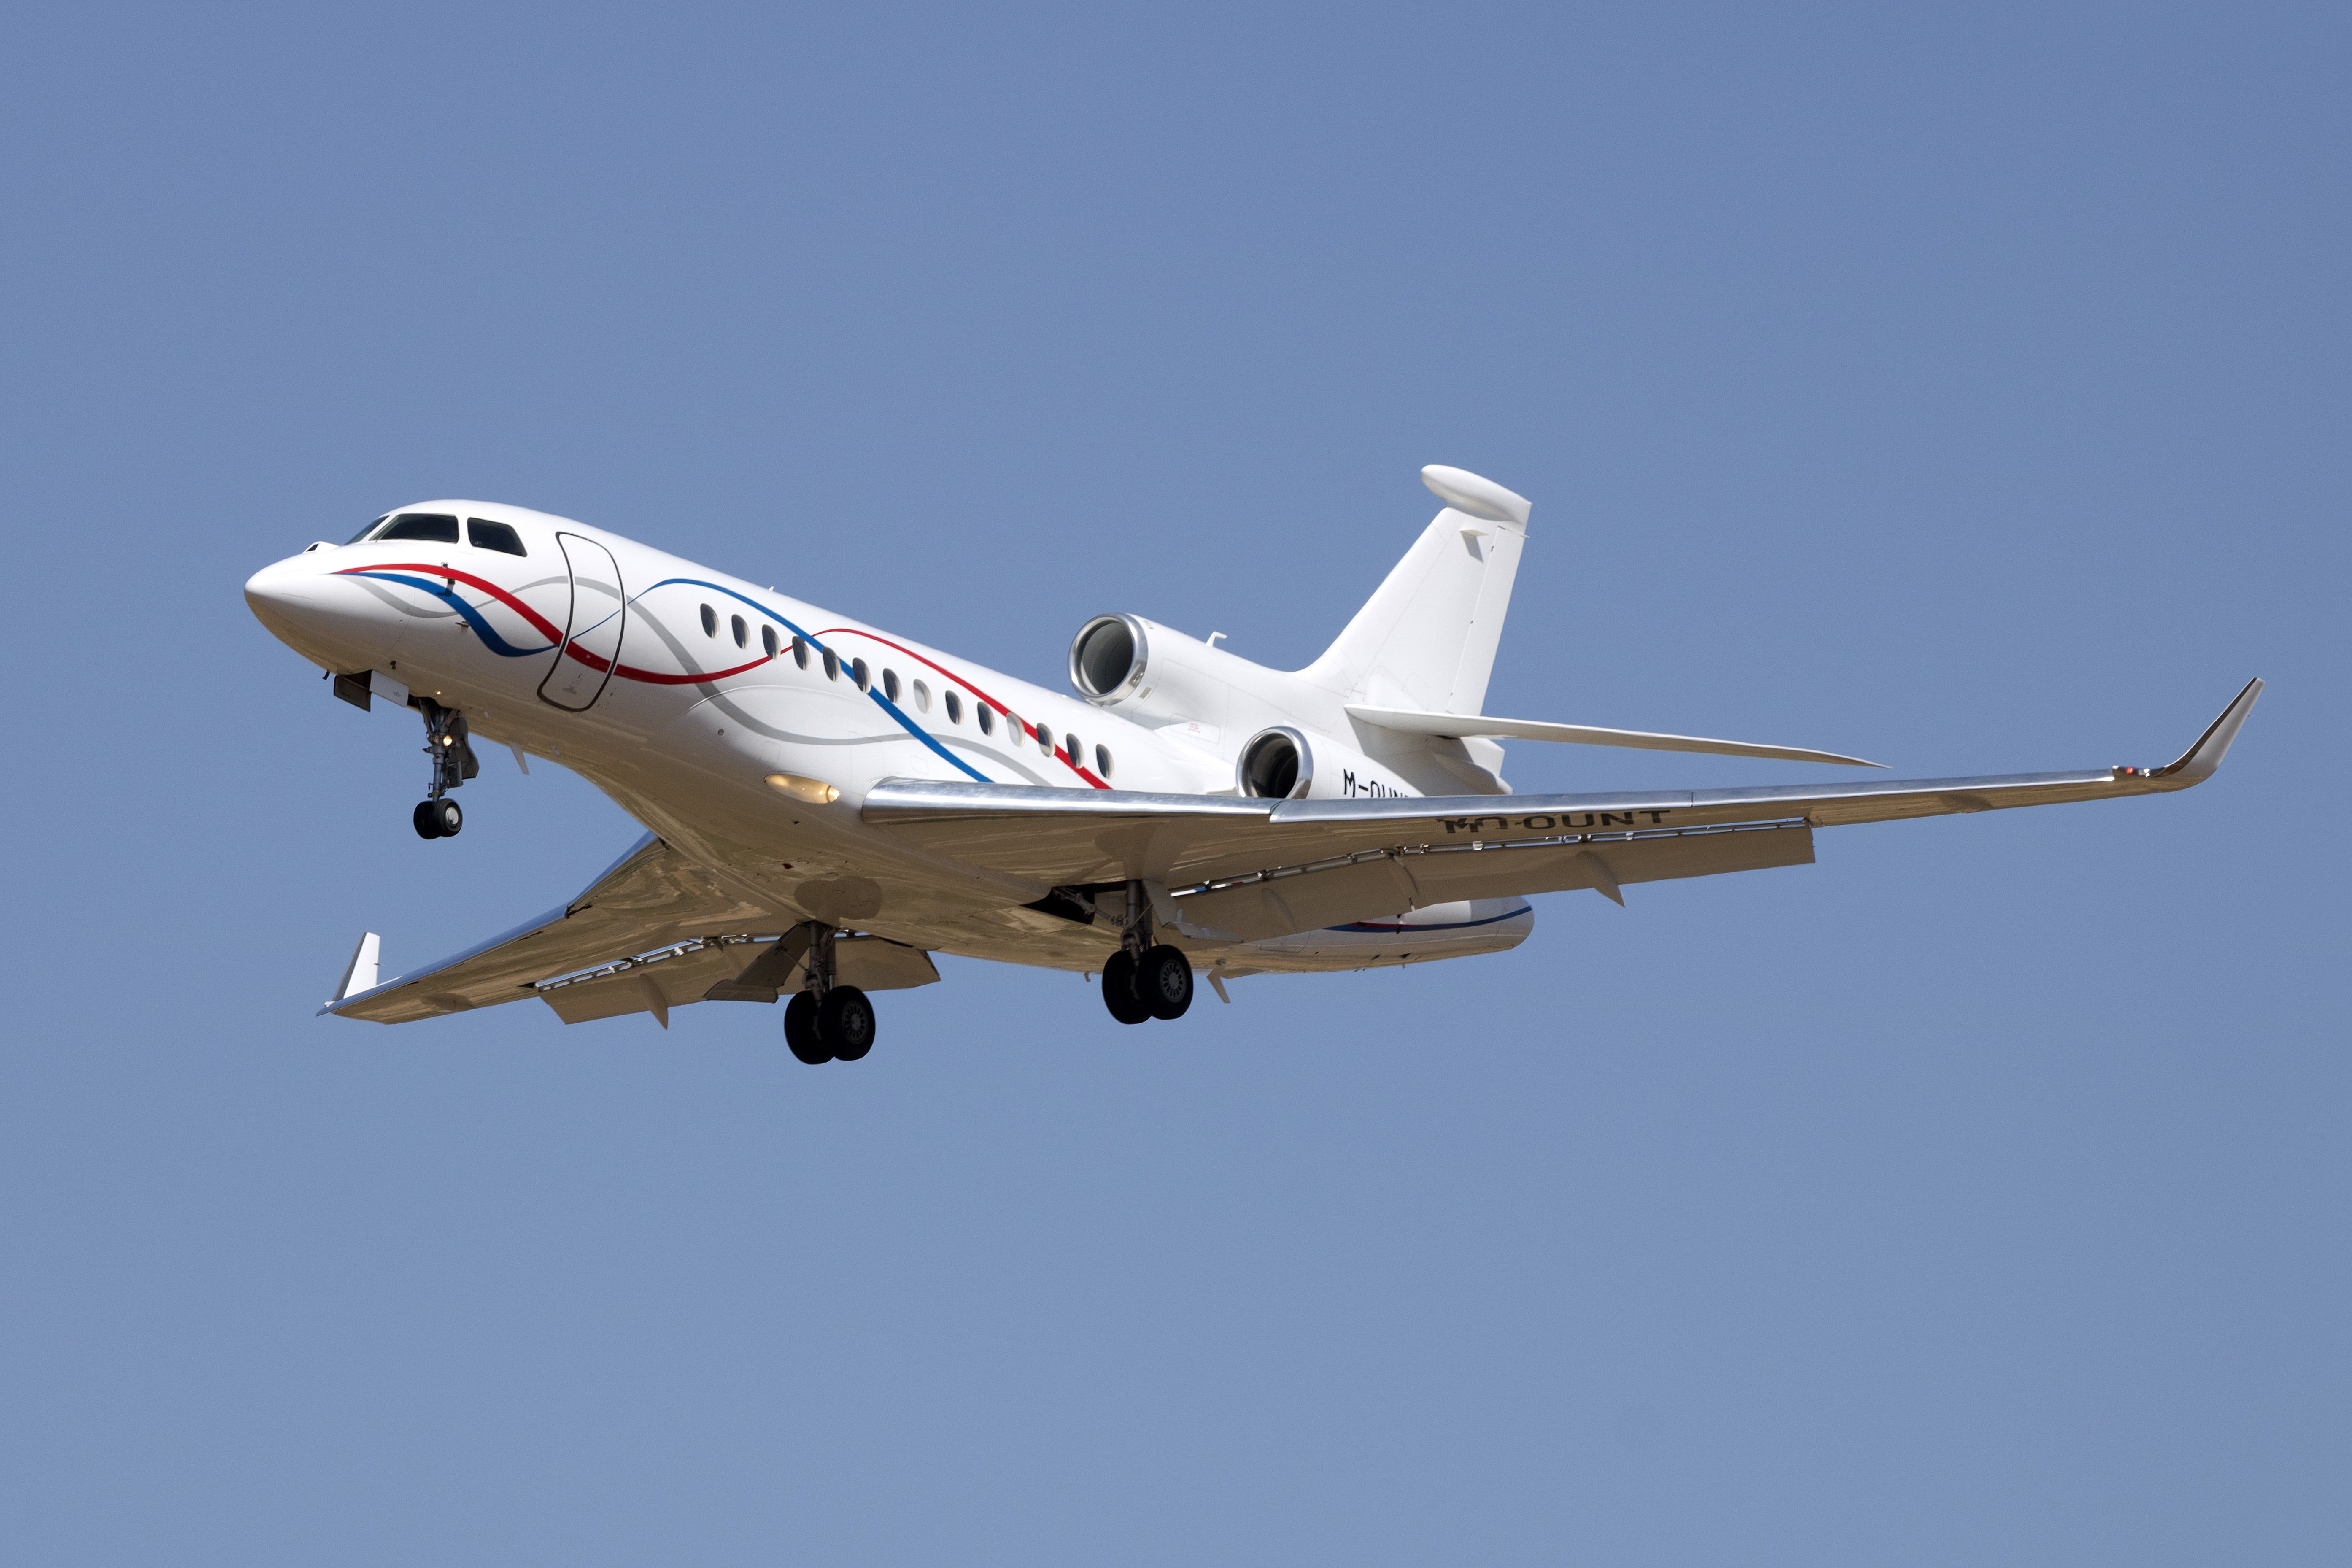 A Dassault Falcon 7X flying in the sky.